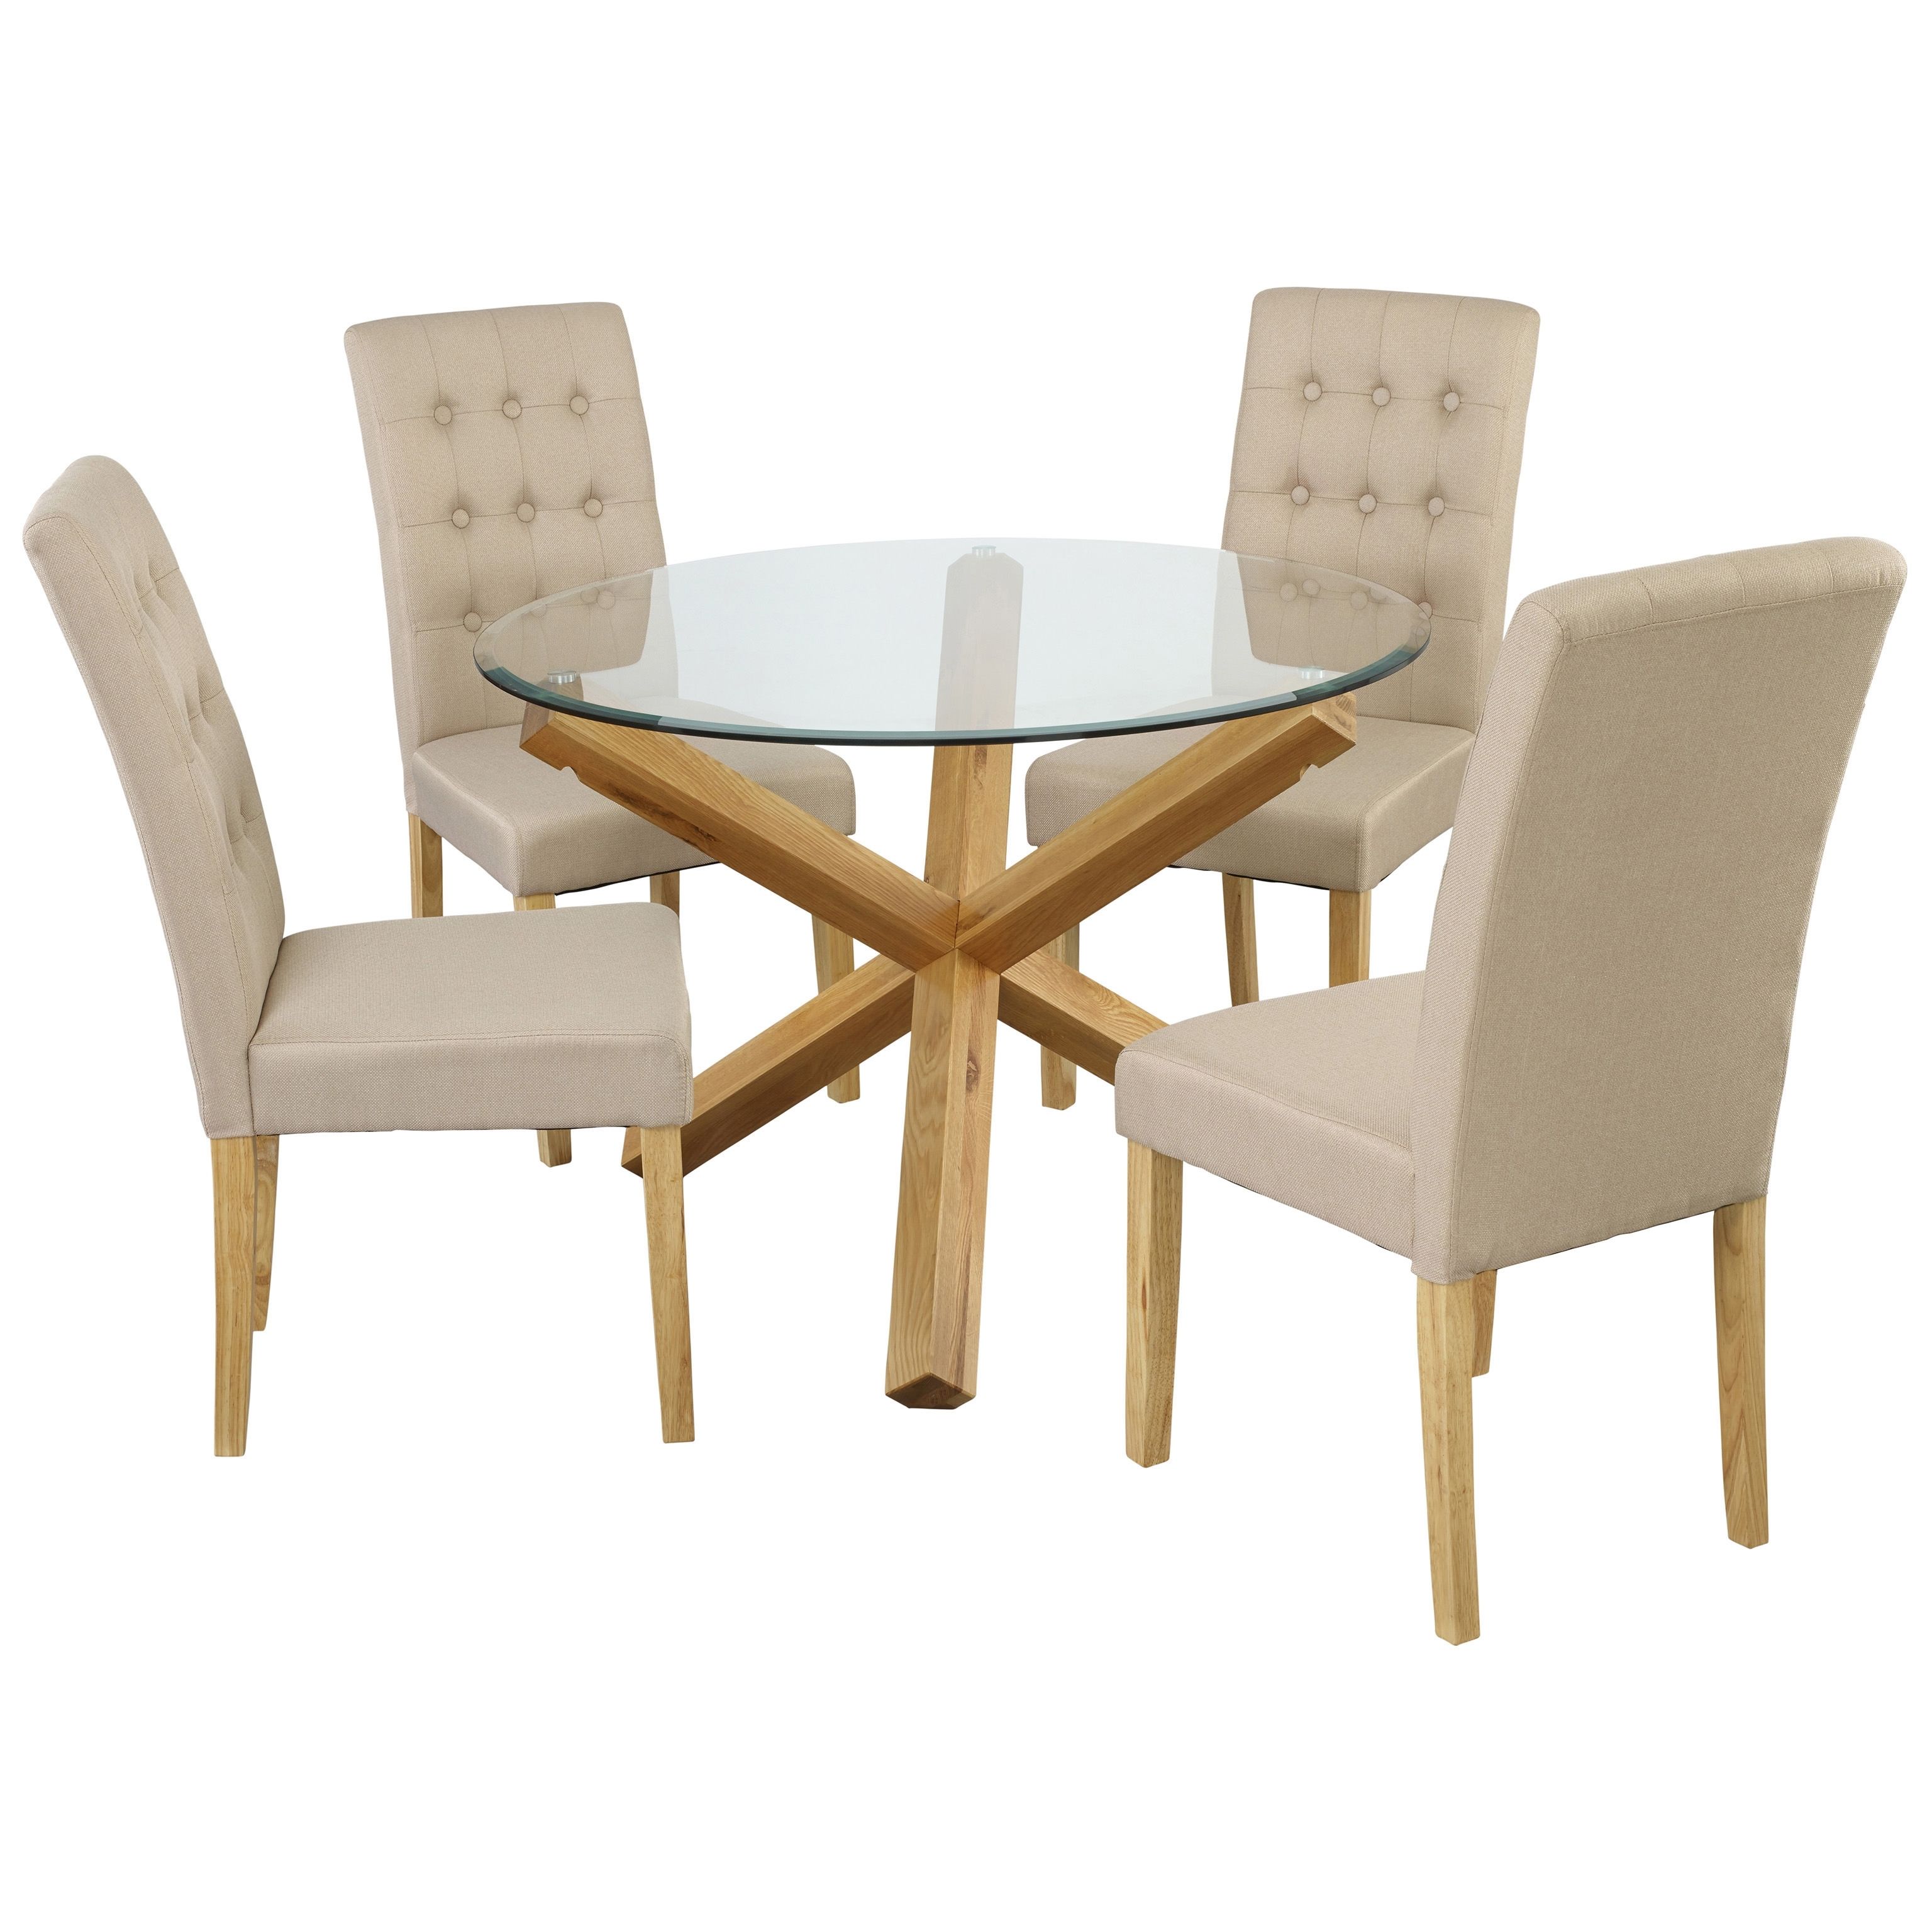 Glass Oak Dining Tables Inside Most Current Oak & Glass Dining Table And Chair Set With 4 Seats (View 8 of 25)